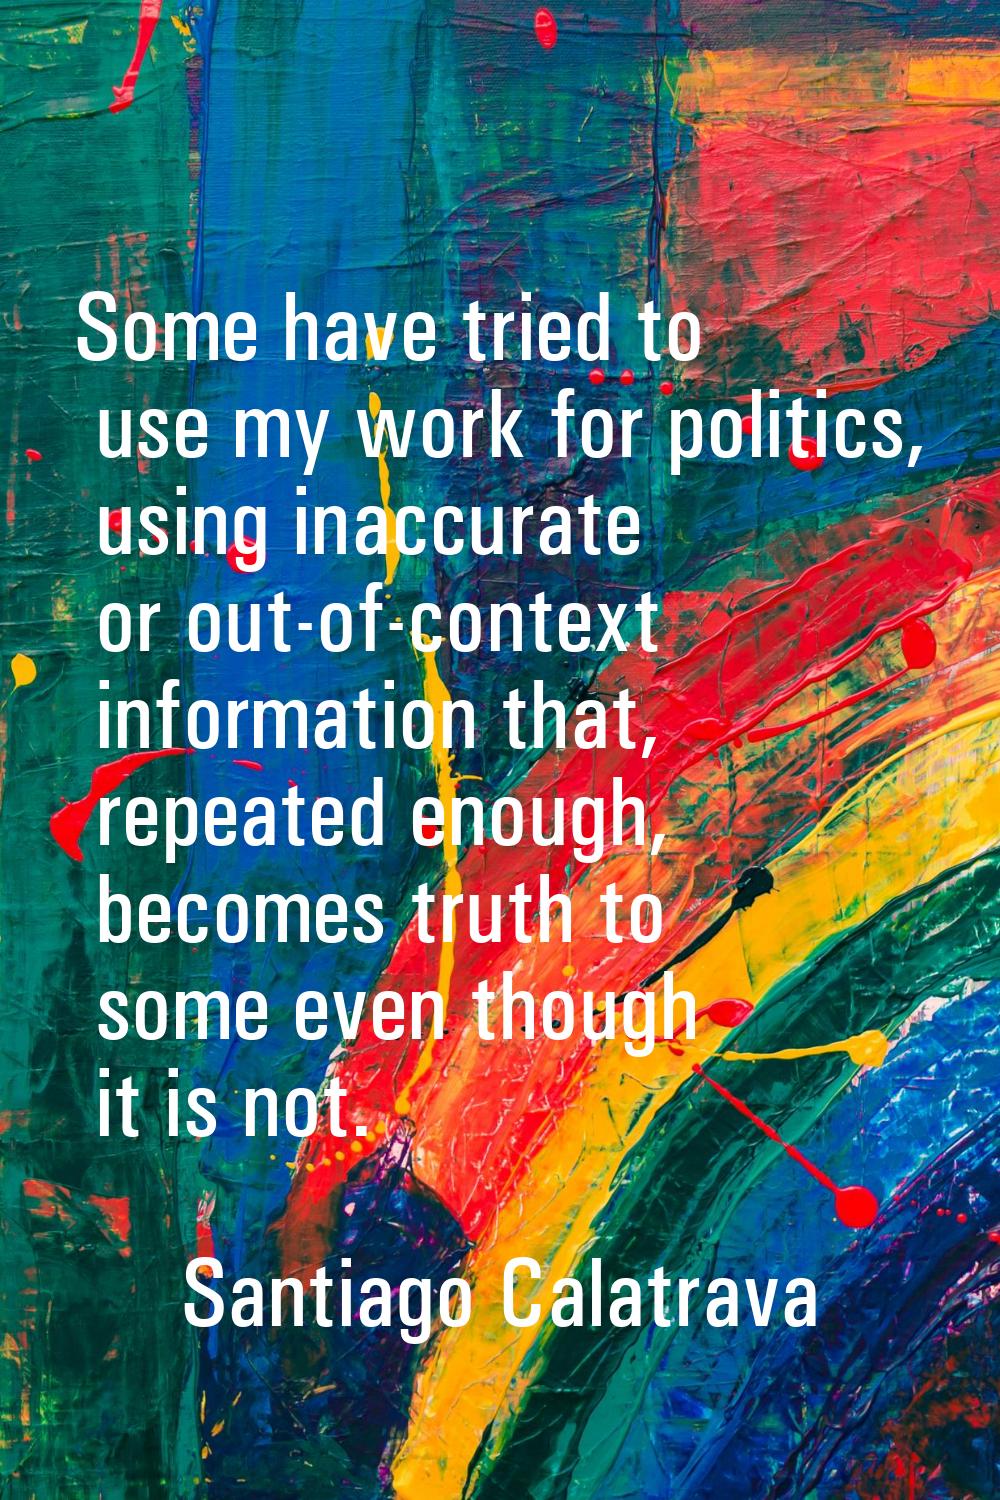 Some have tried to use my work for politics, using inaccurate or out-of-context information that, r